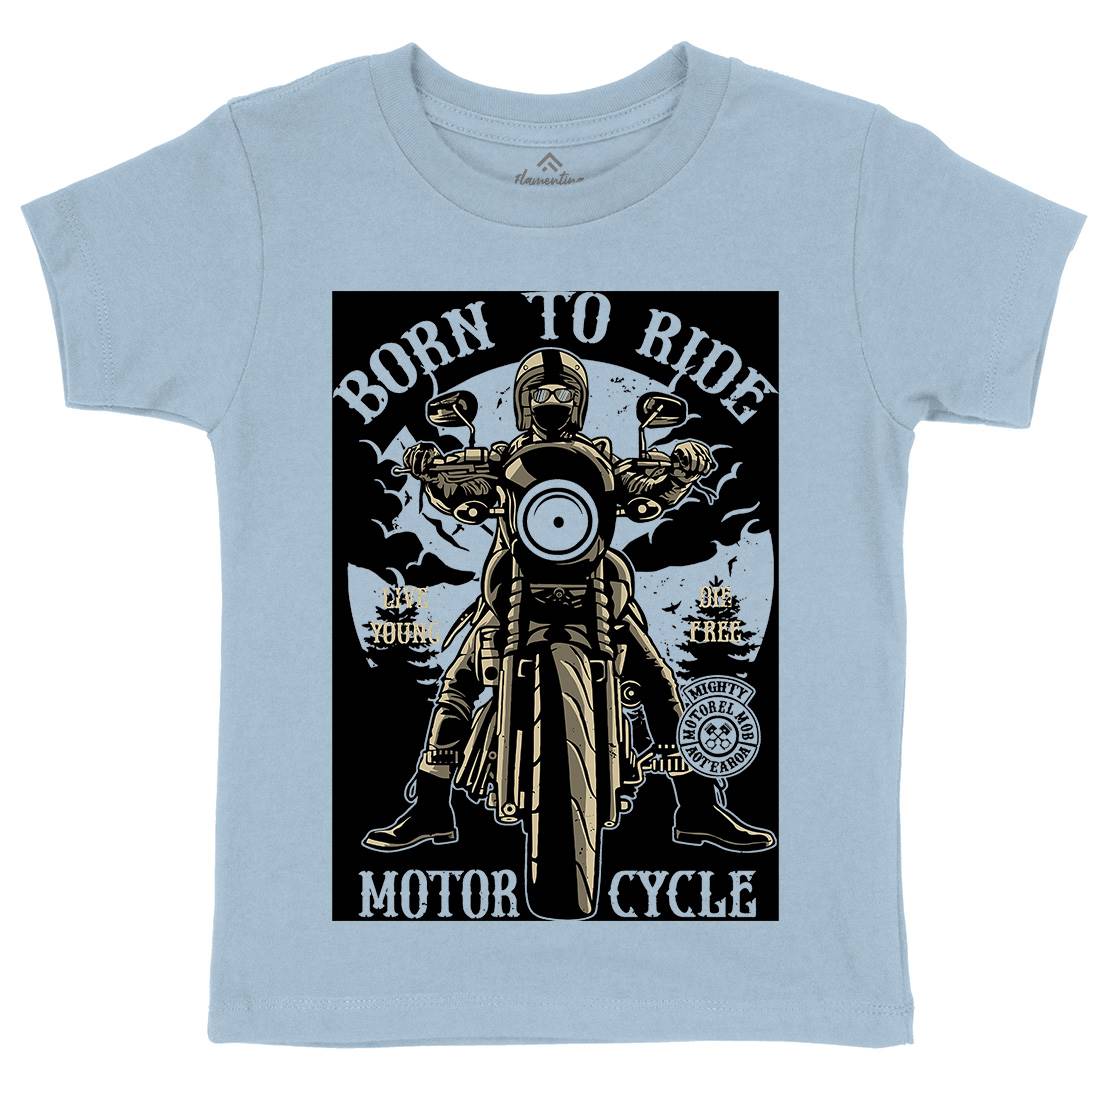 Born To Ride Kids Crew Neck T-Shirt Motorcycles A512